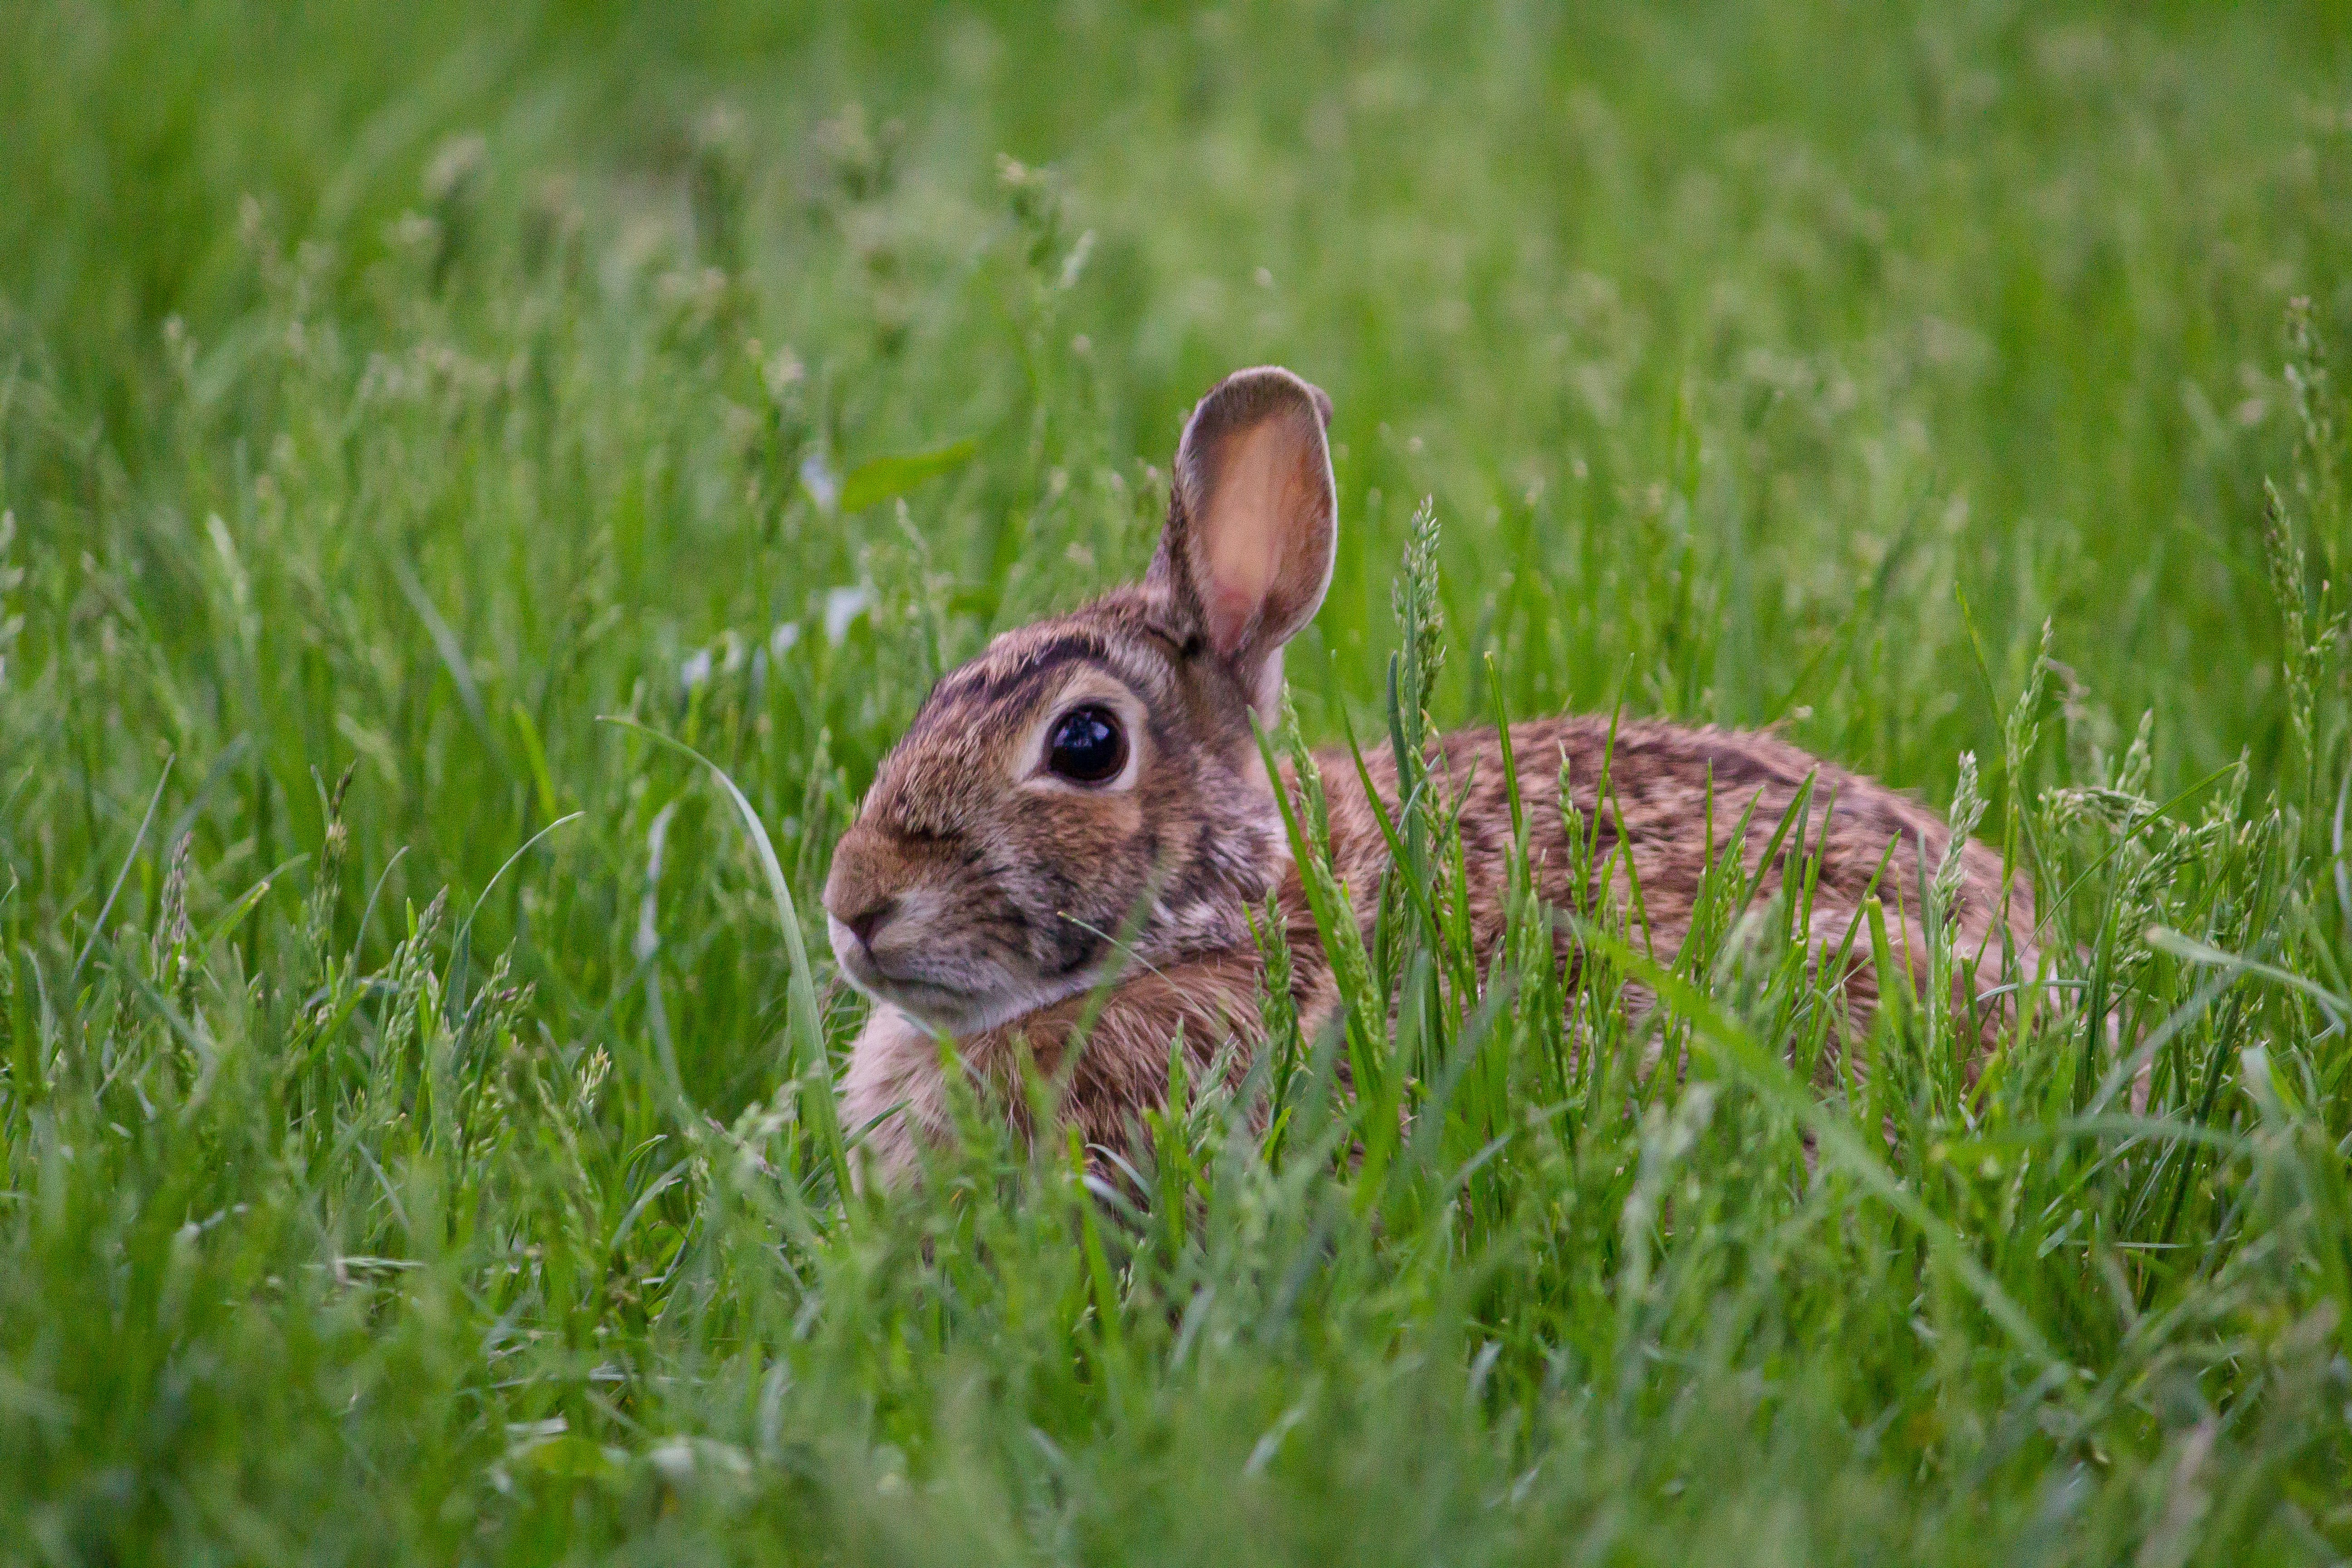 brown hare sitting on green grass at daytime